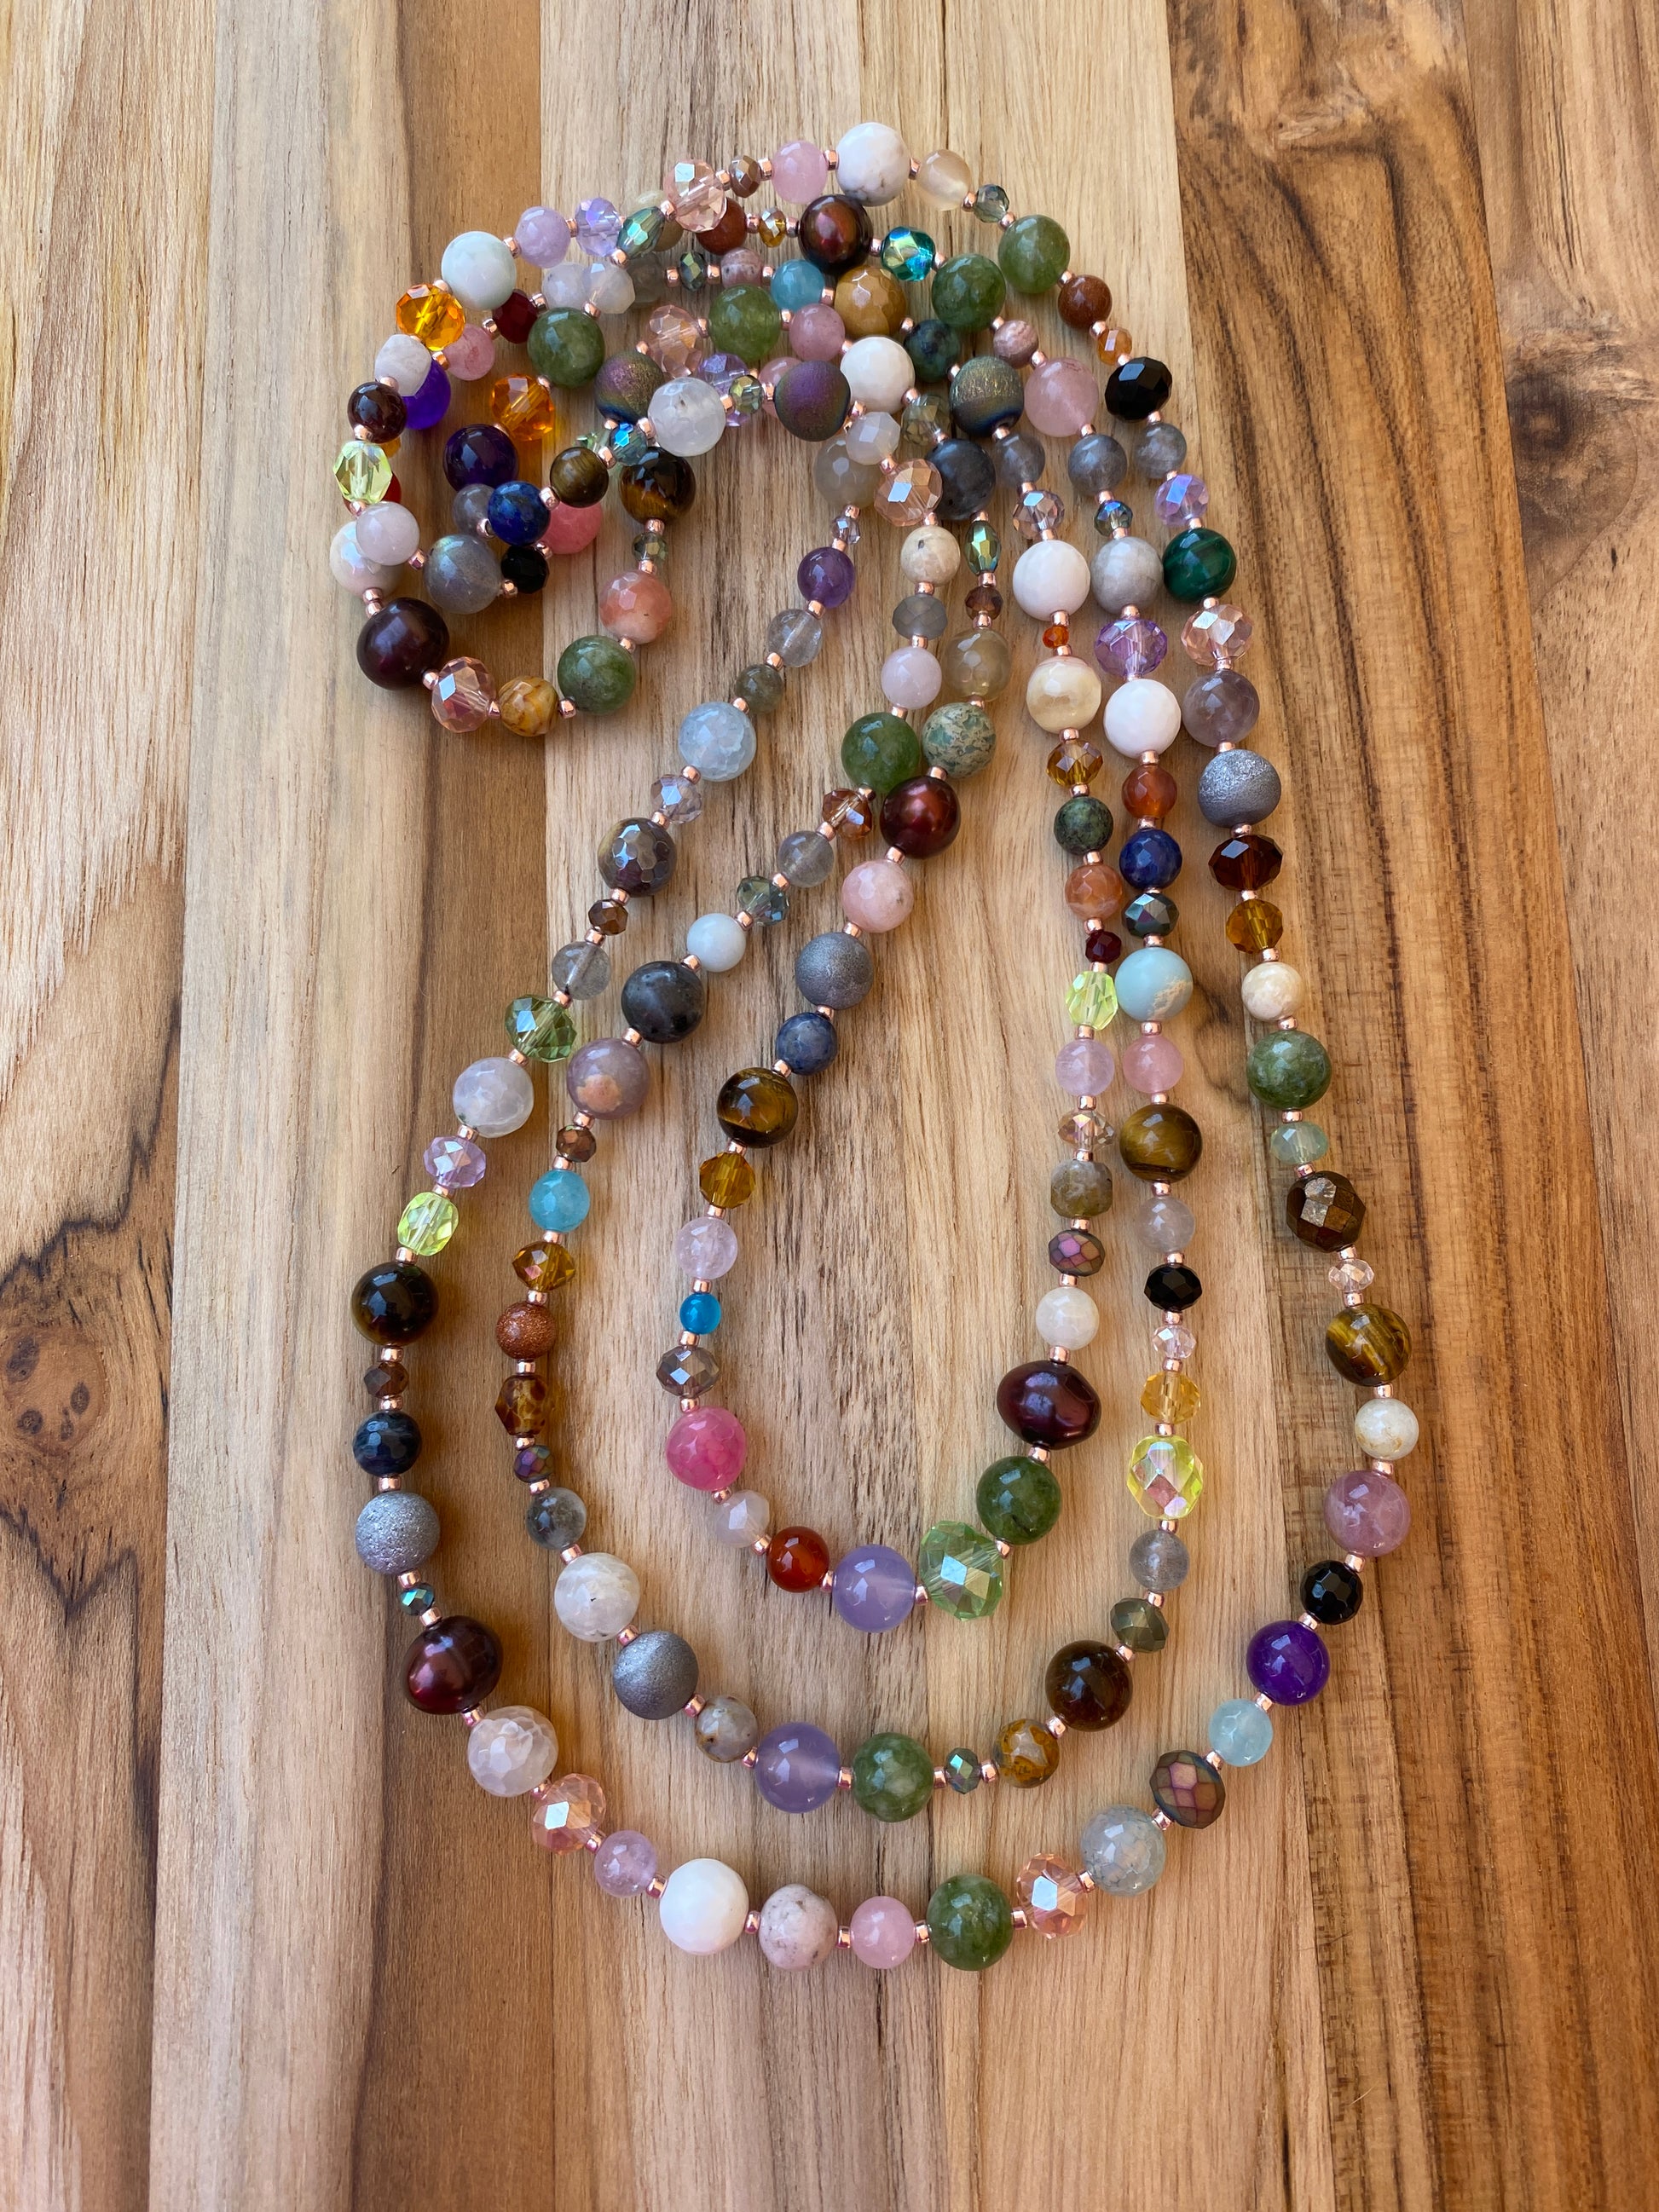 60" Extra Long Wraparound Style Multi Gemstone Beaded Necklace with Crystal and Glass Beads - My Urban Gems